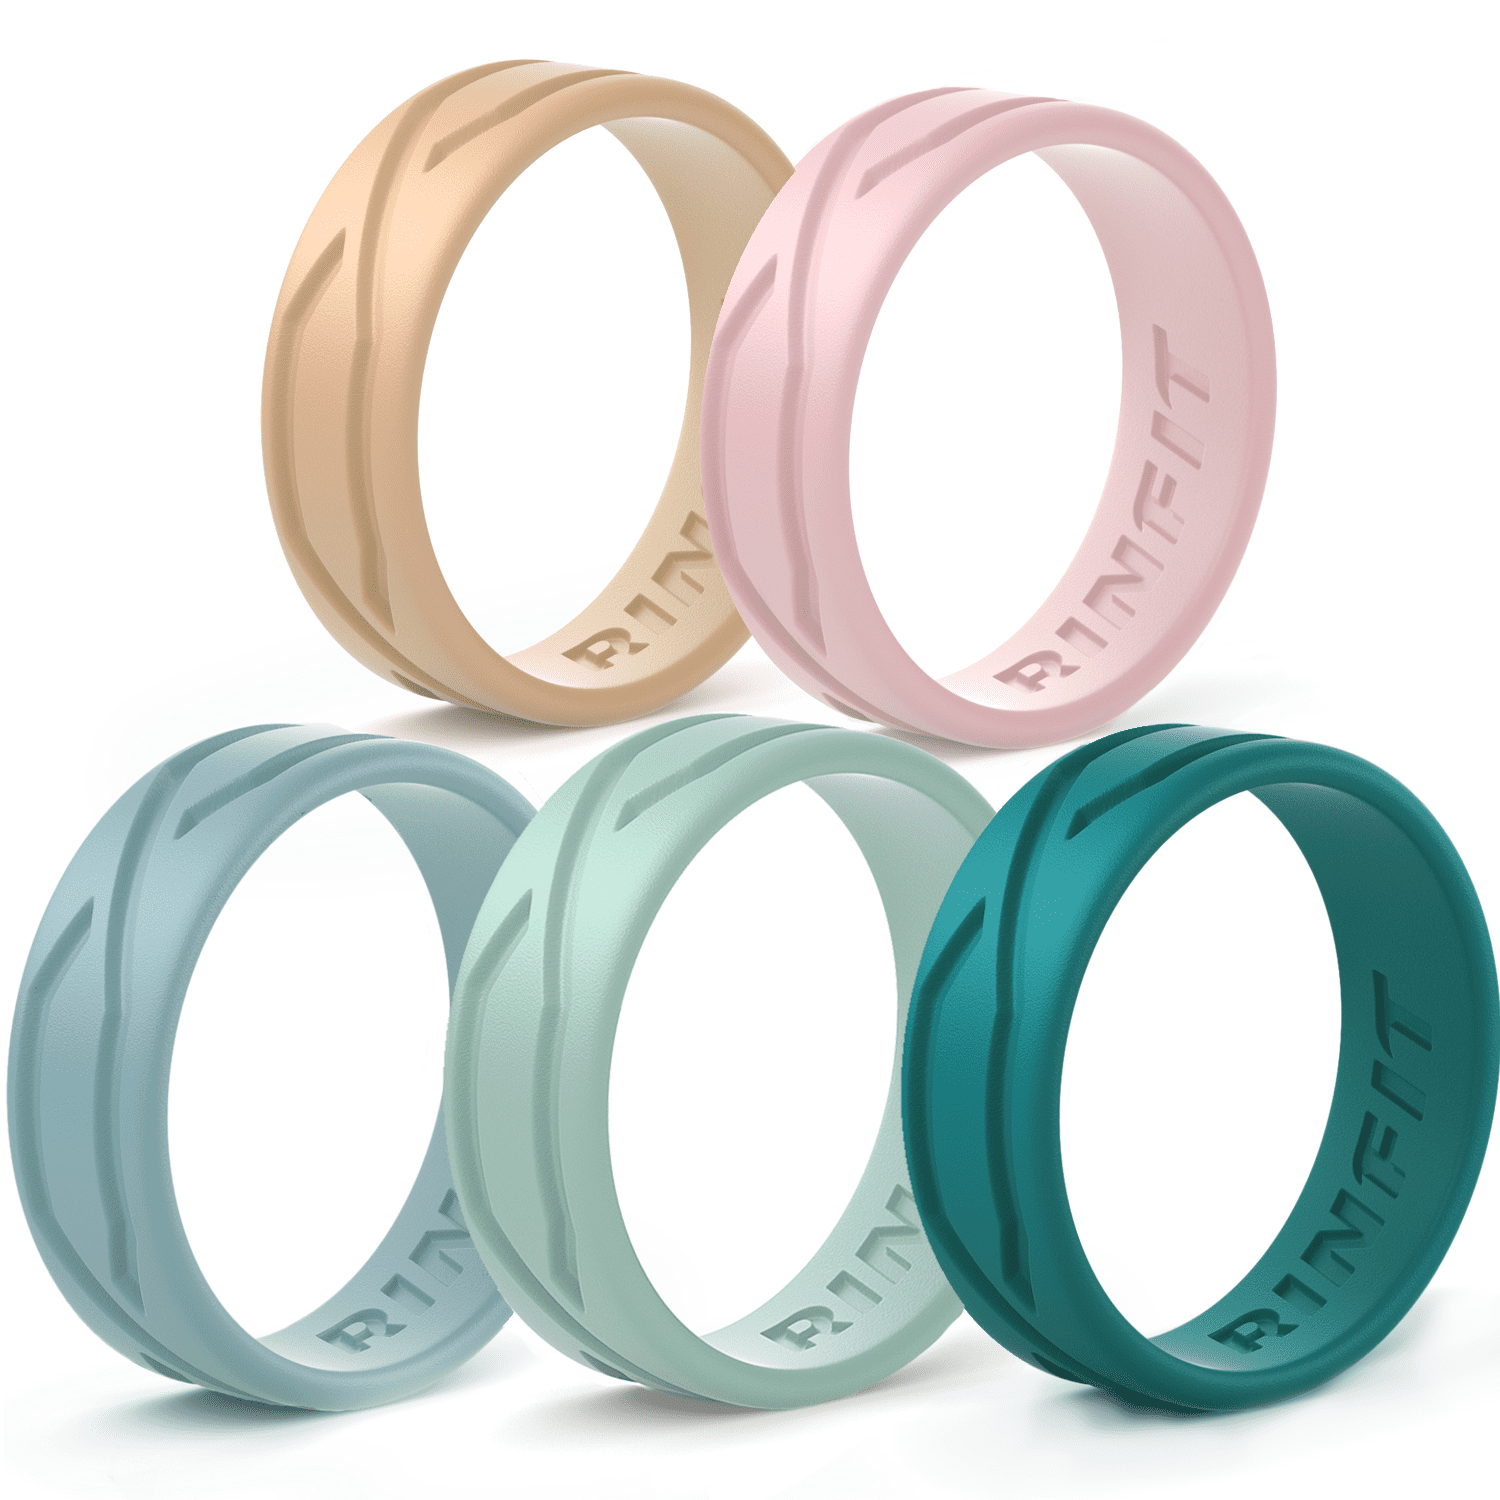 Soft Comfortable Durable Wedding Ring Replacement. Affordable Metal Free Rubber Wedding Bands Rinfit Designed Silicone Wedding Ring for Women Set of Thin and Stackable Rings 3 Pack & 4 Pack